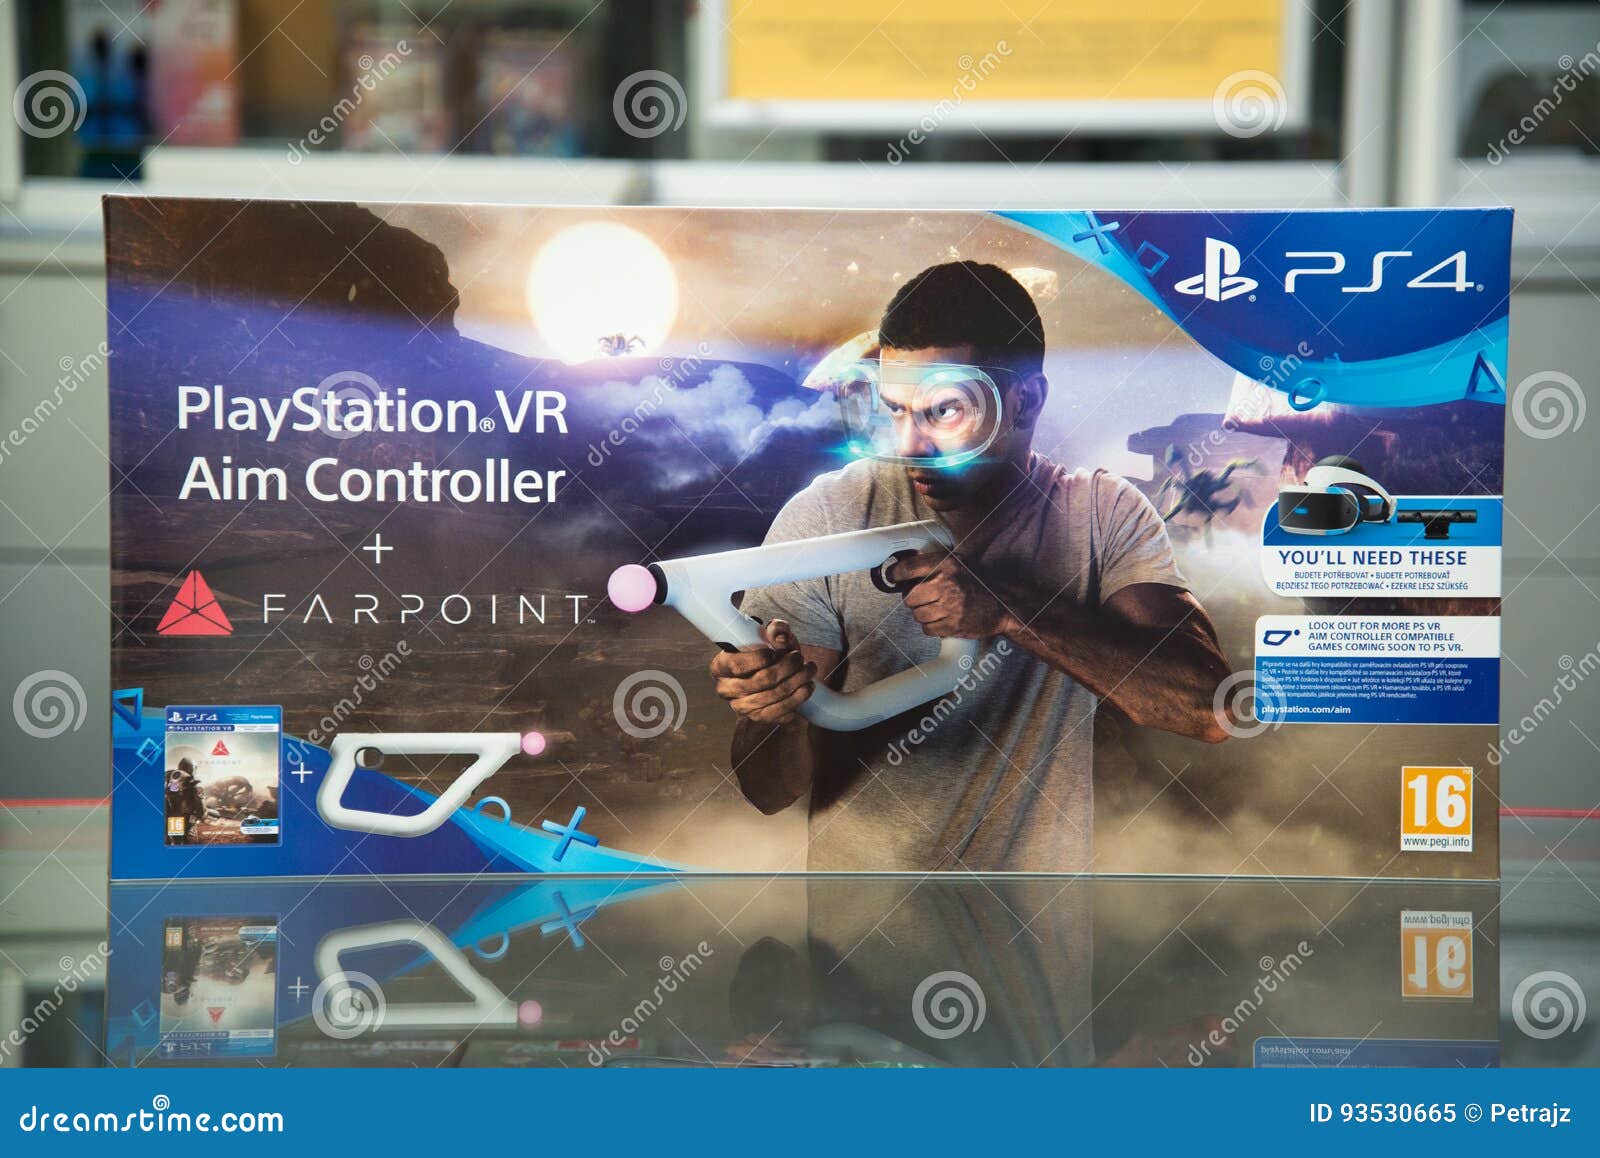 Playstation VR Controller Farpoint Videogame Editorial Image Image of headset, point: 93530665